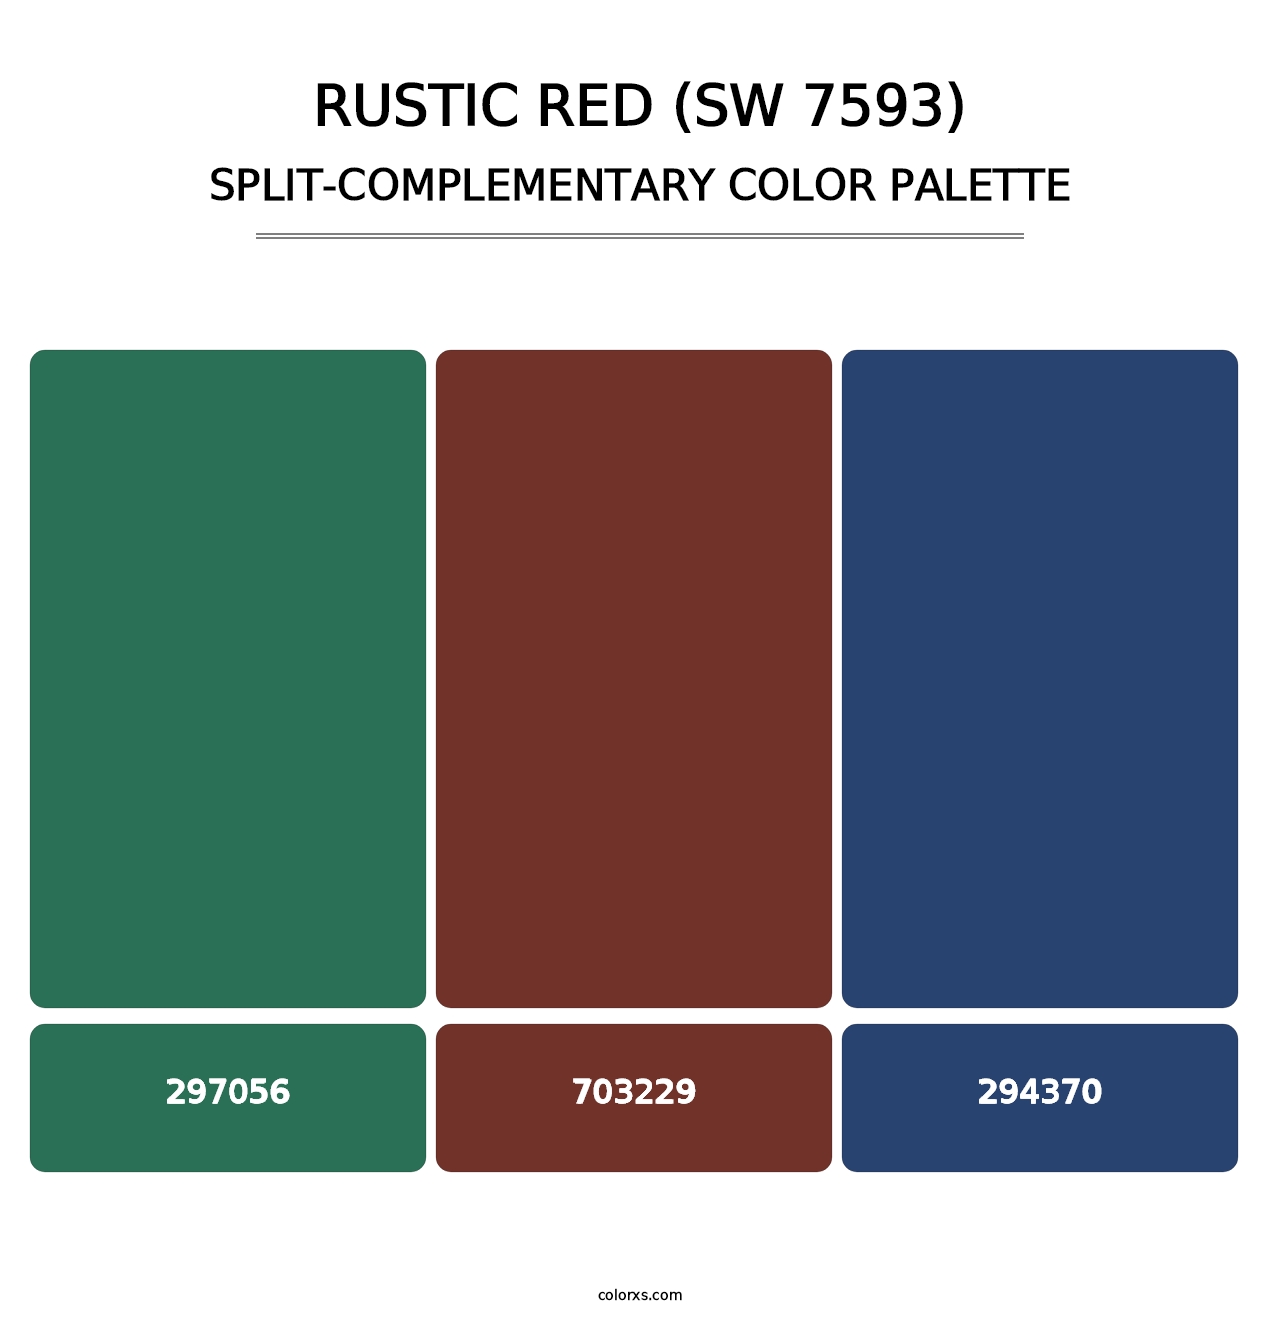 Rustic Red (SW 7593) - Split-Complementary Color Palette